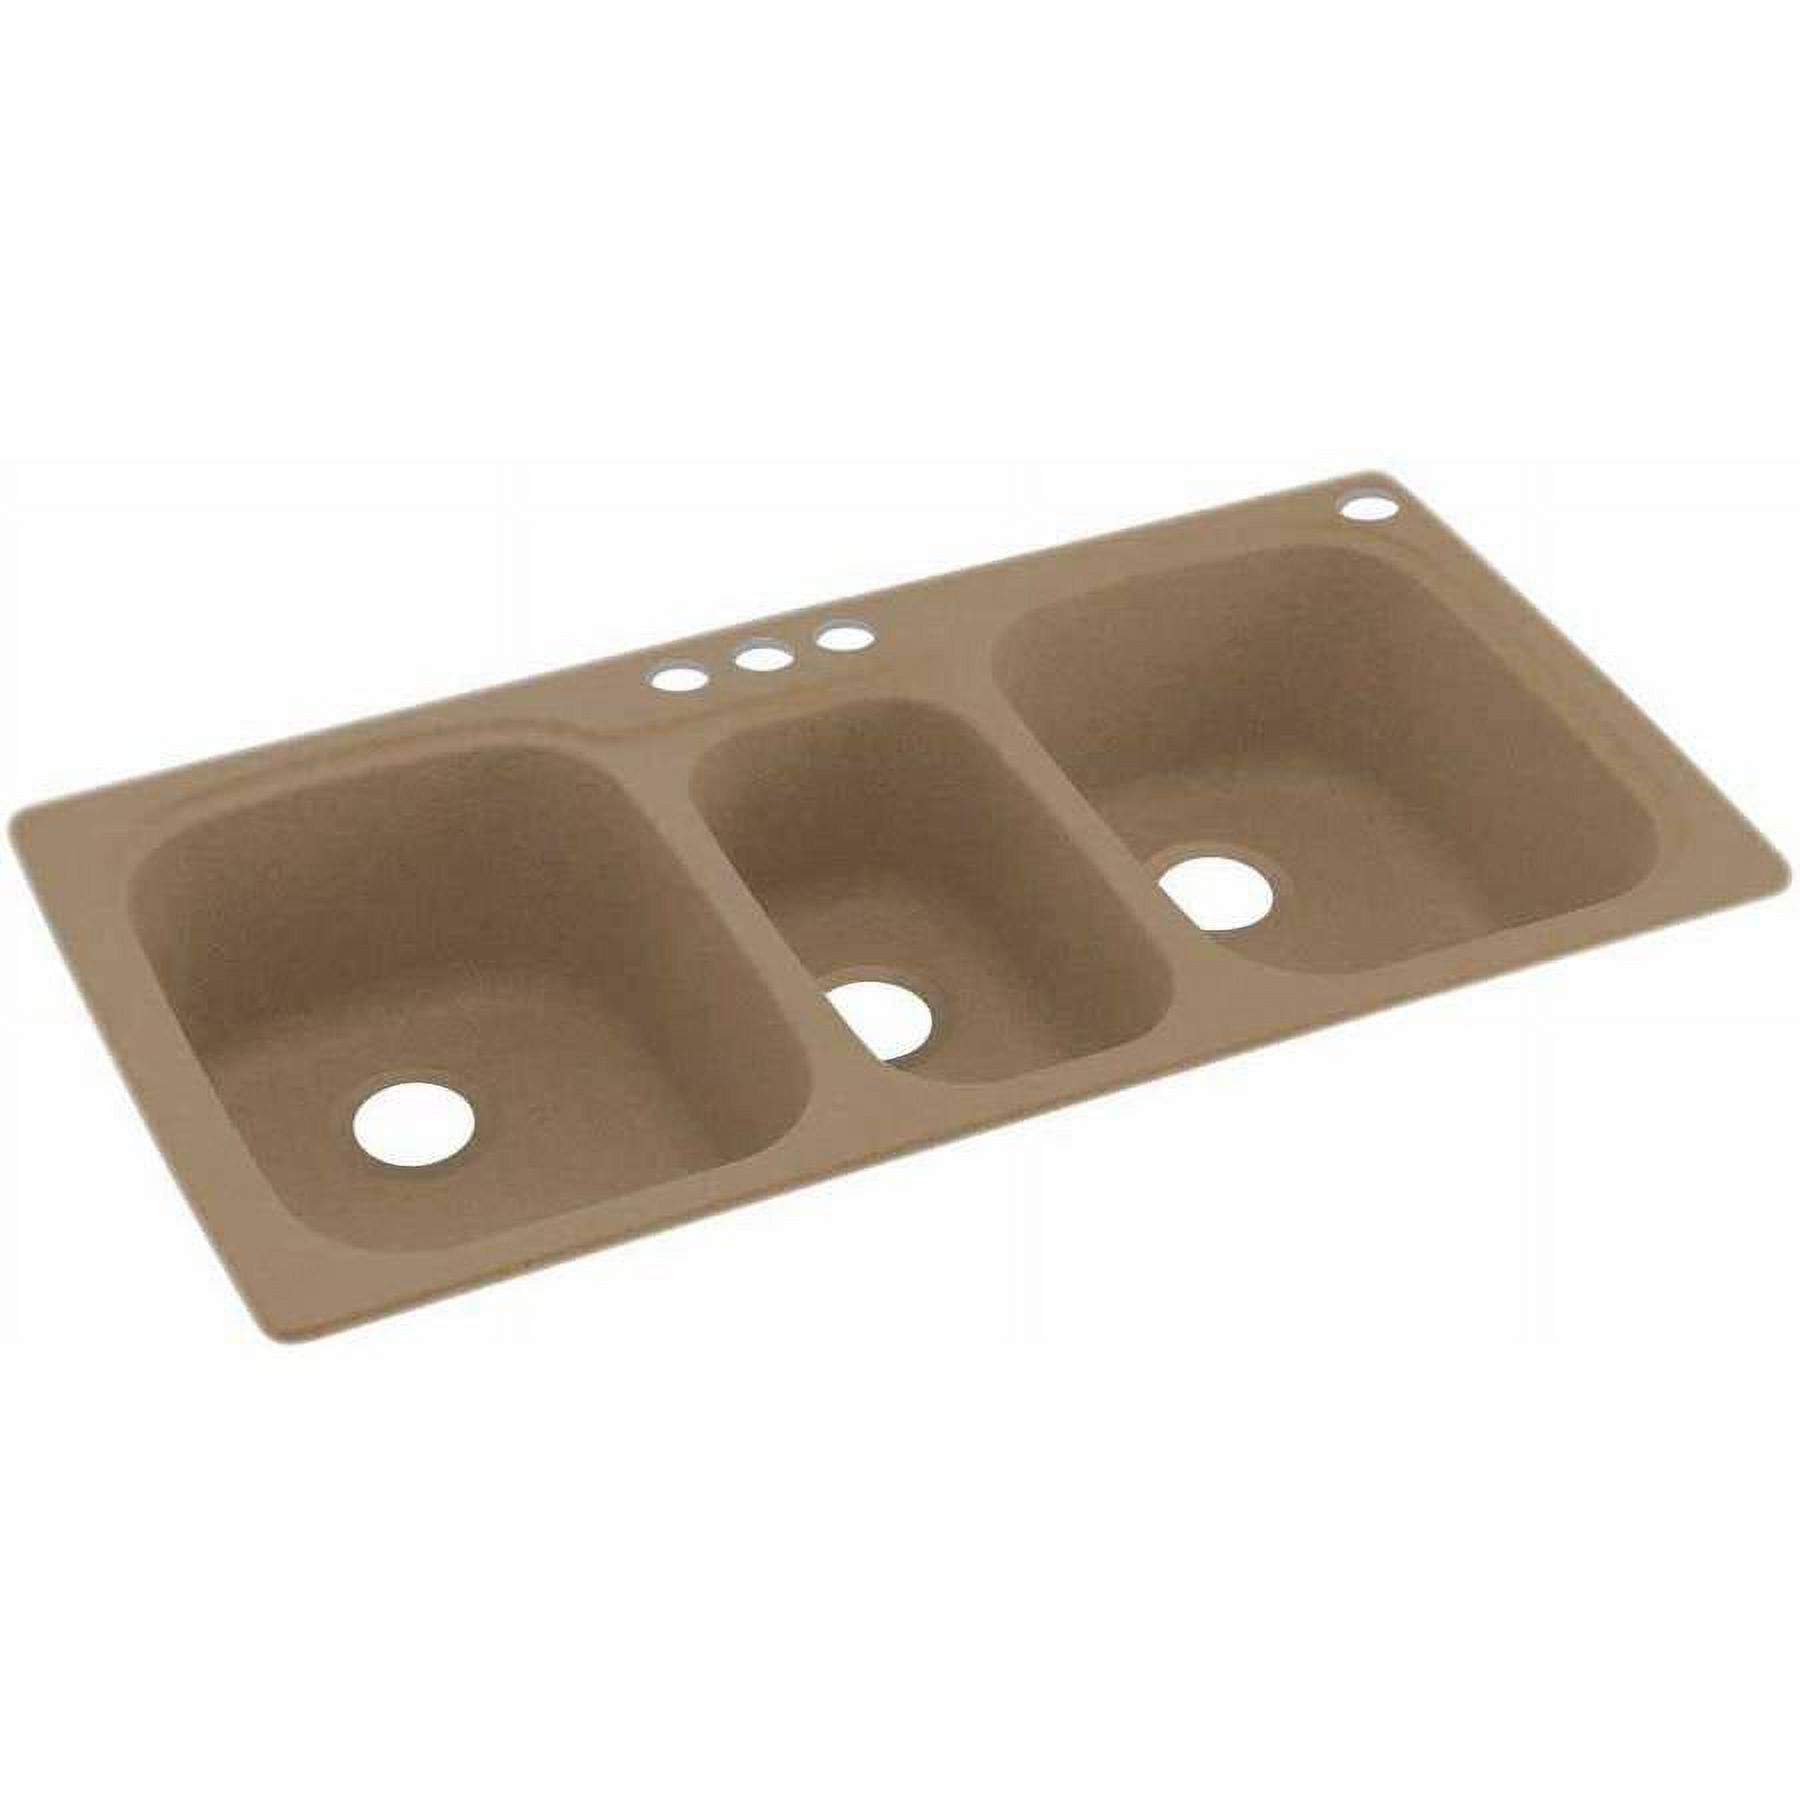 Swan Solid Surface 3-Bowl Kitchen Sink (44" x 22") with 4 Faucet Holes - image 1 of 1